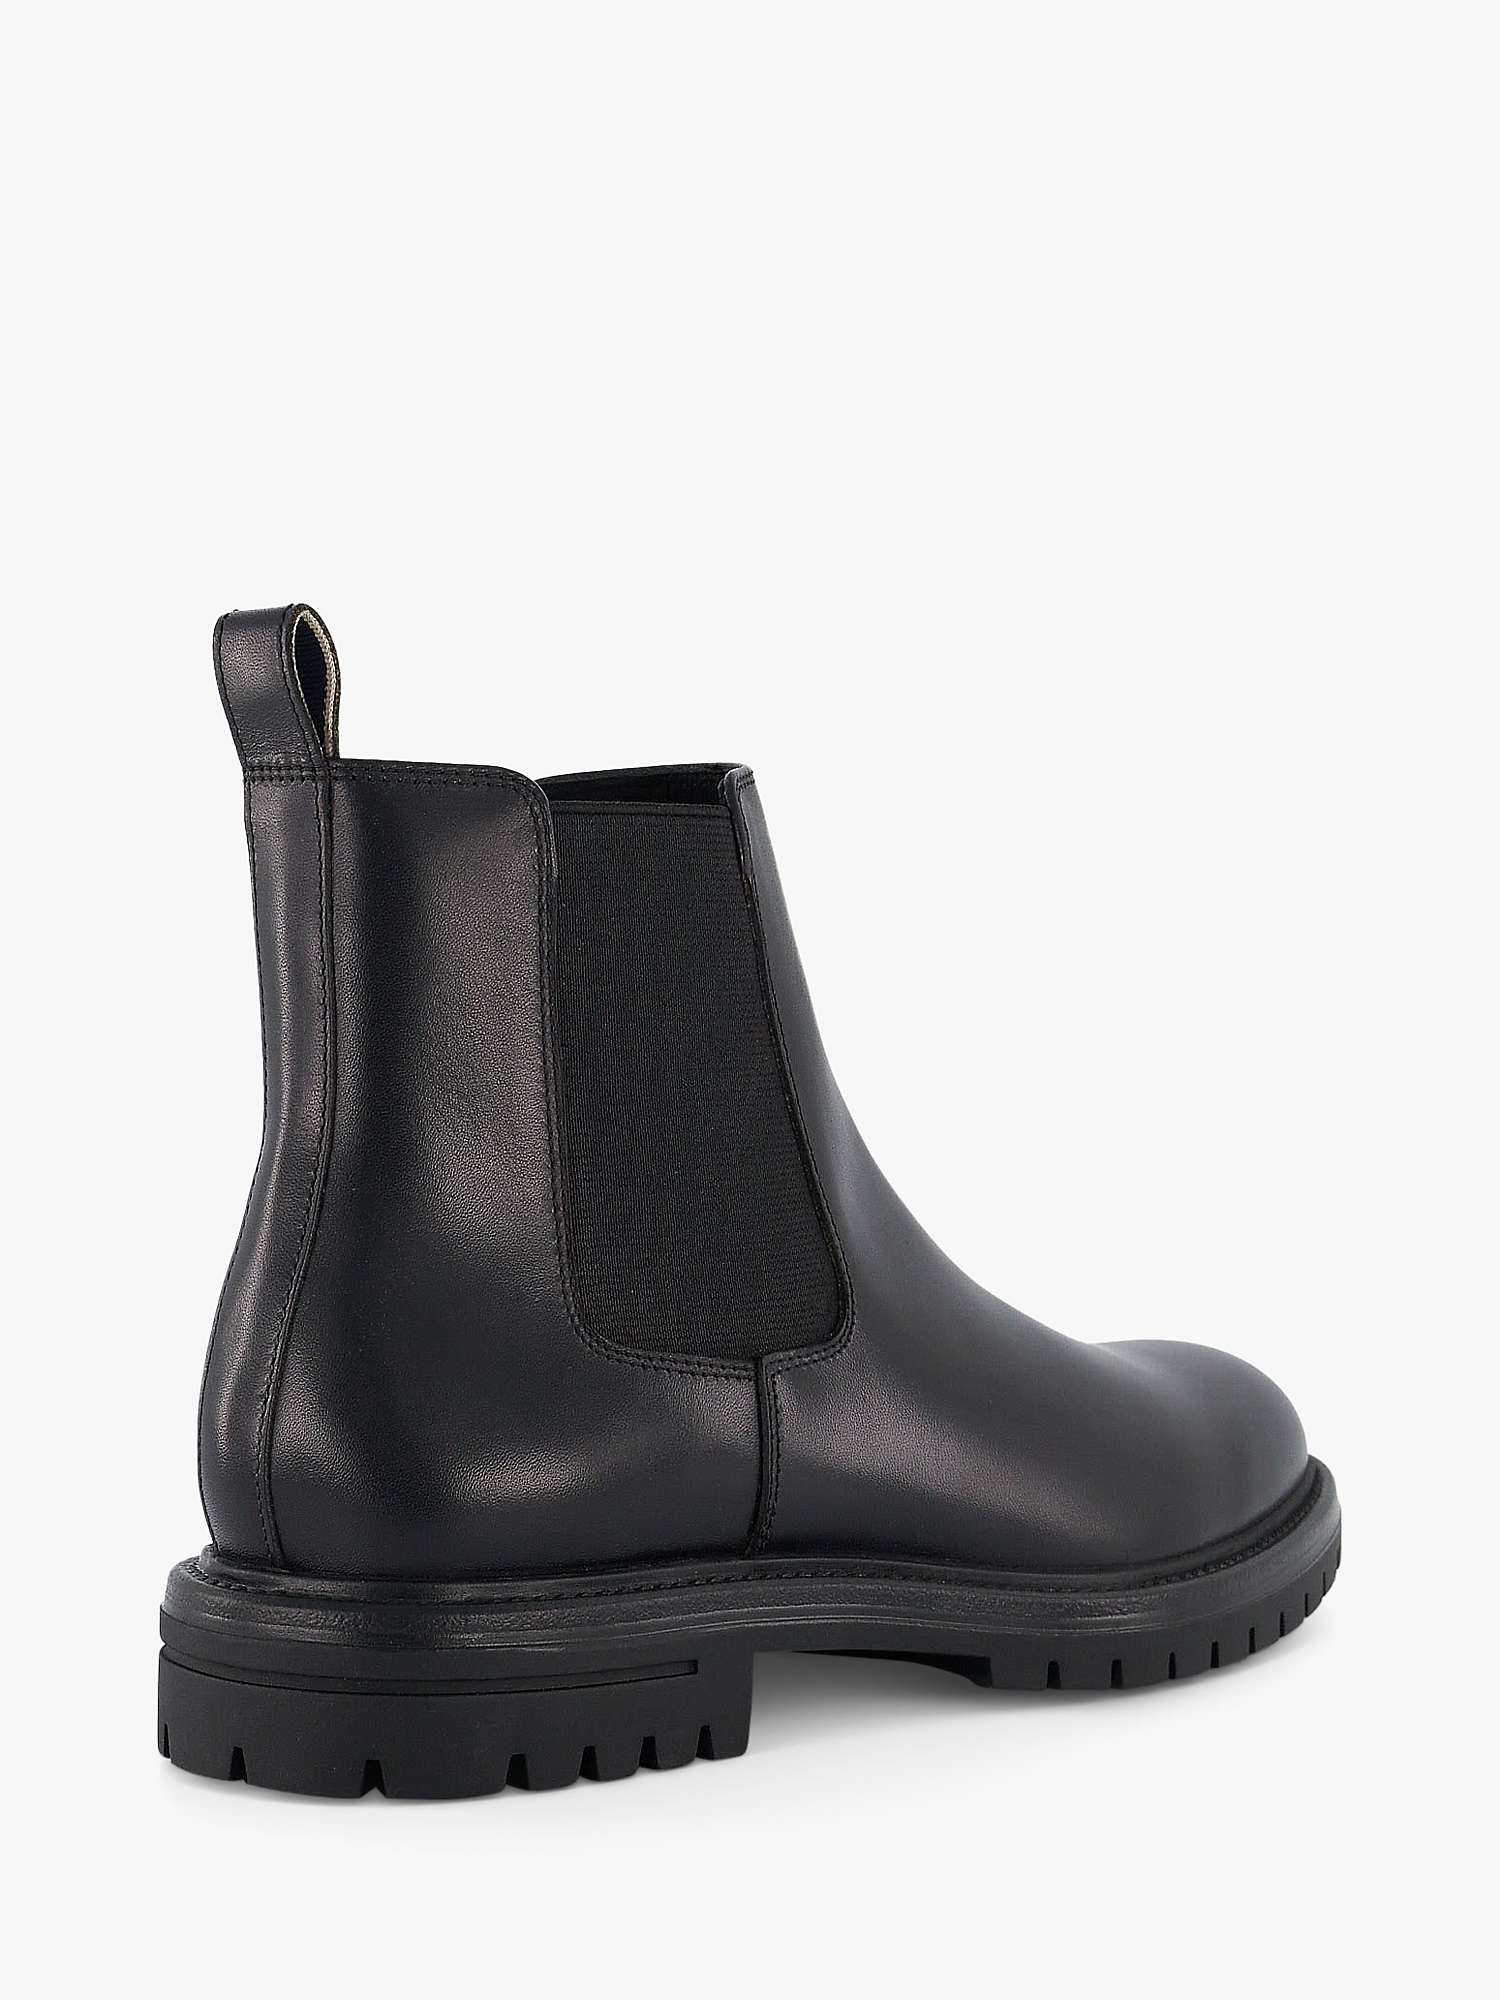 Dune Created Leather Chelsea Boots, Black, Black at John Lewis & Partners